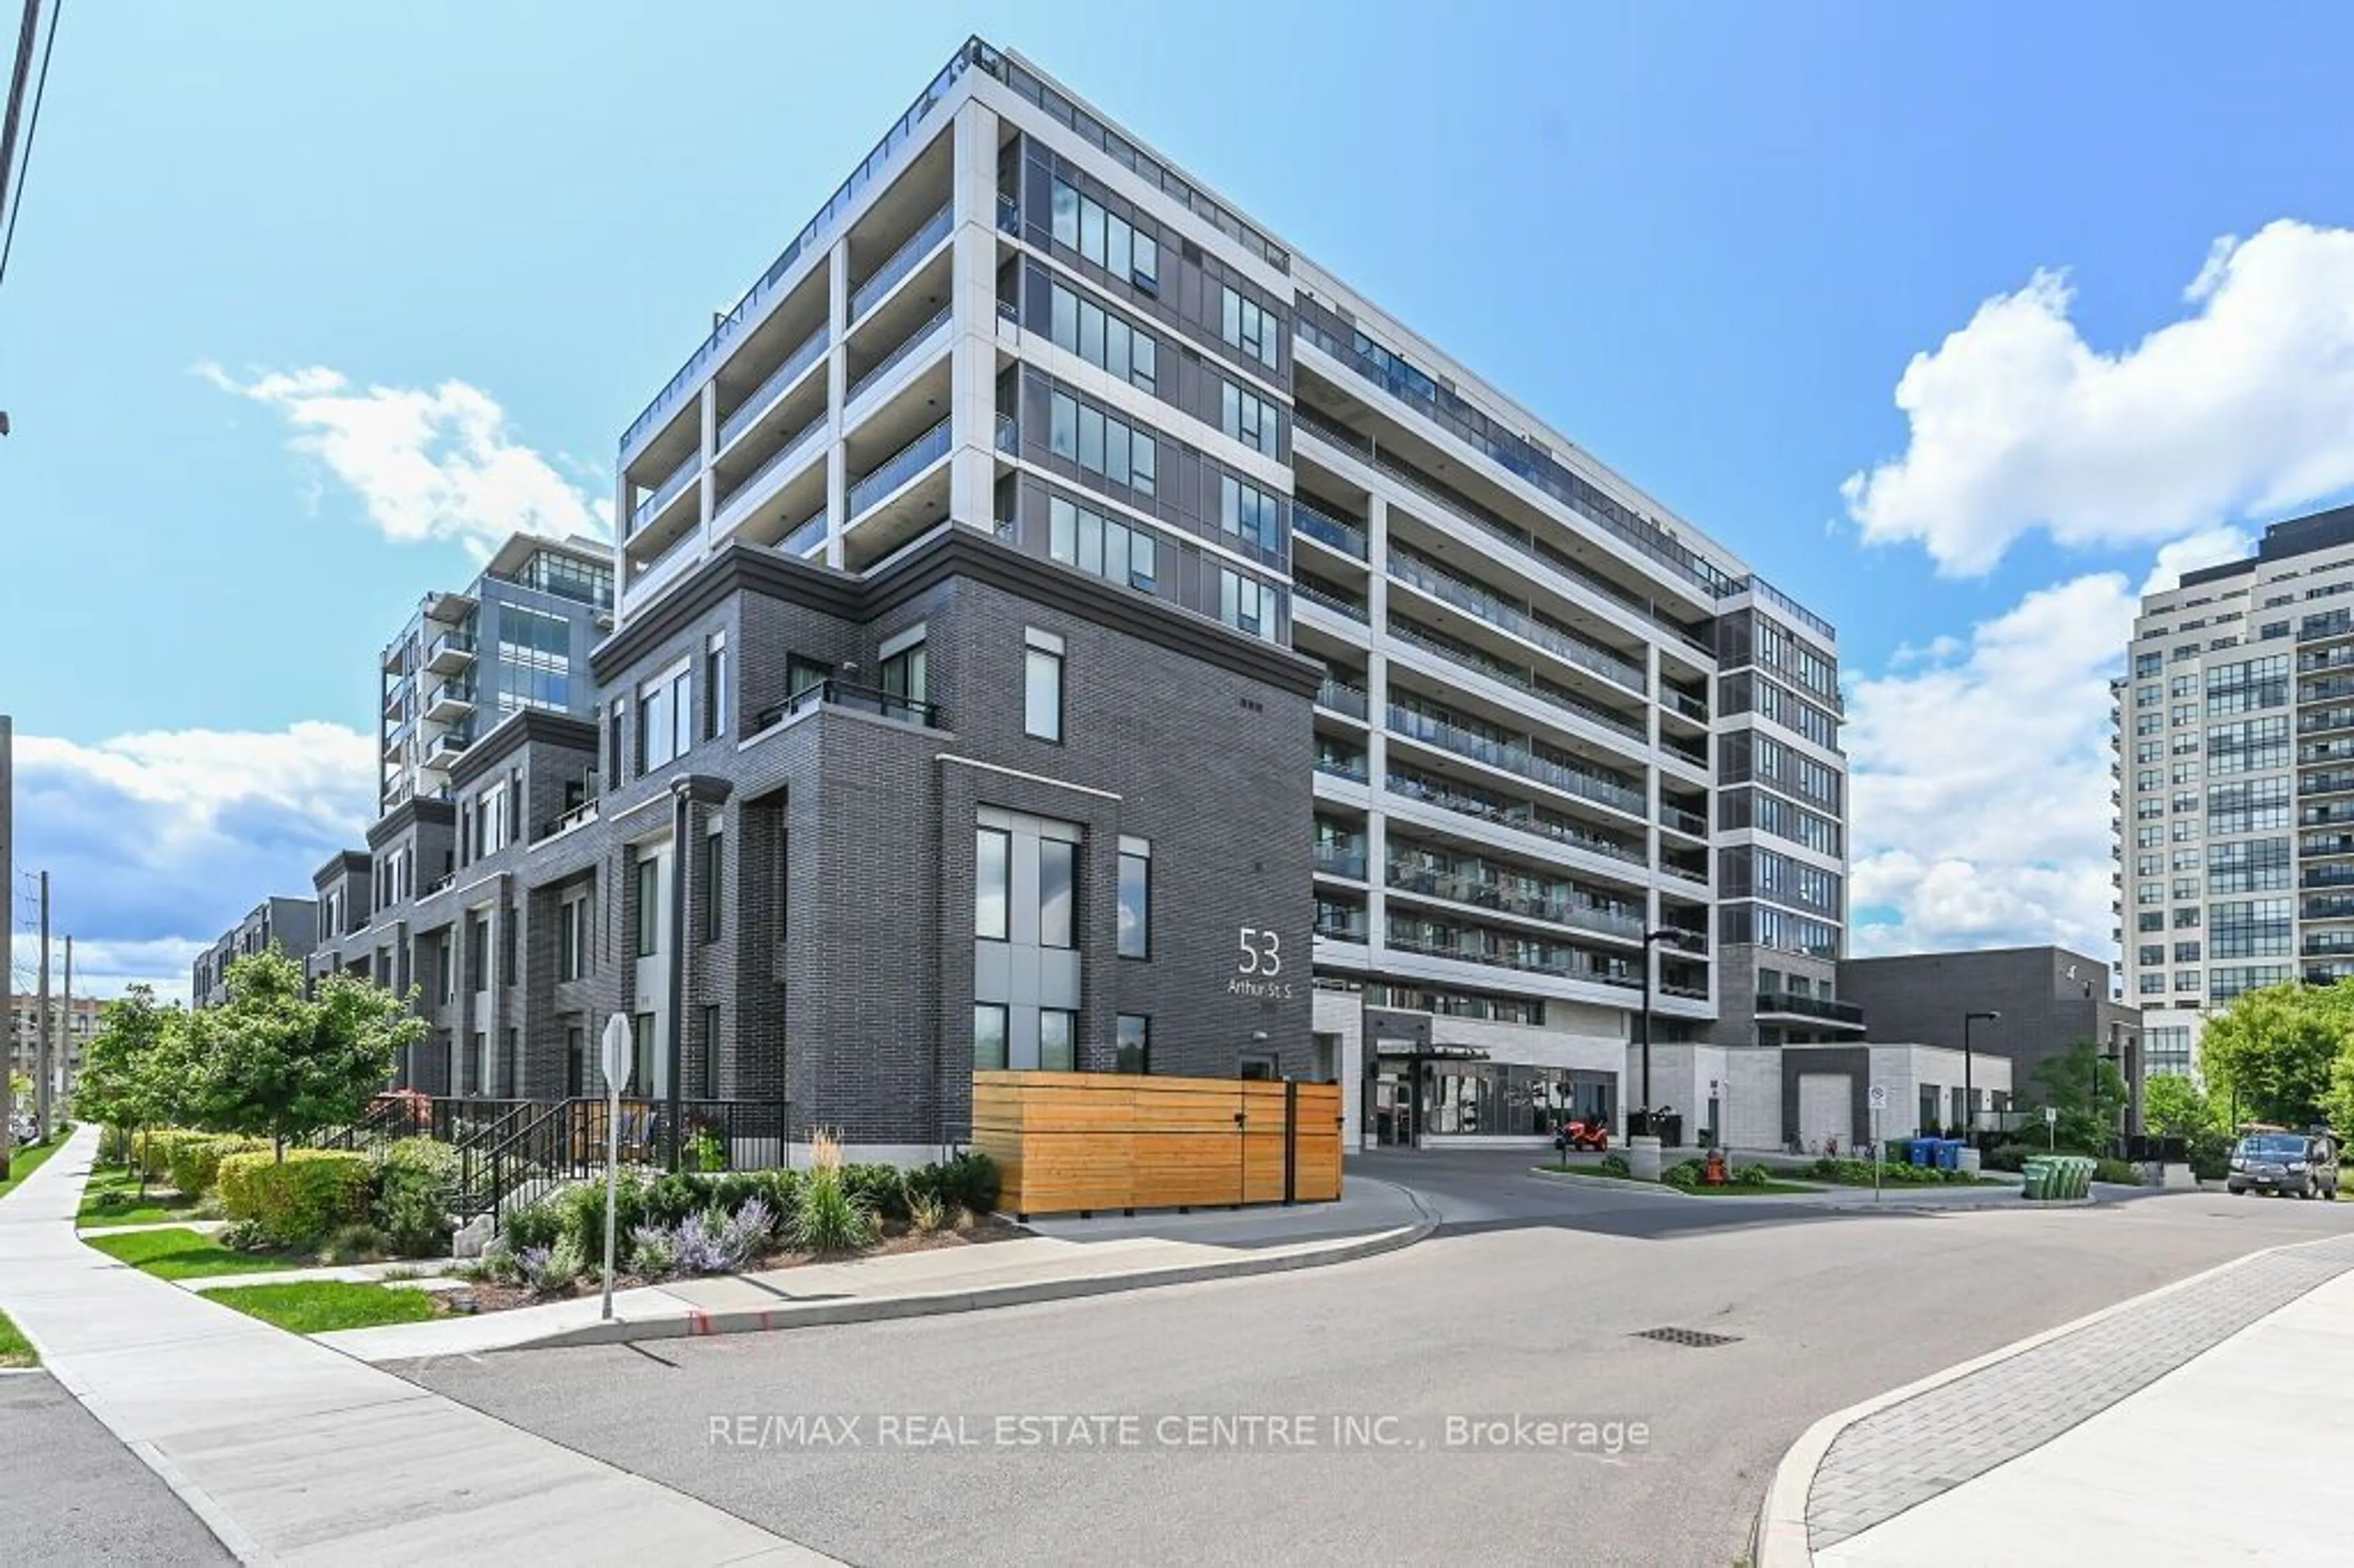 A pic from exterior of the house or condo for 53 Arthur St #909, Guelph Ontario N1E 5K2